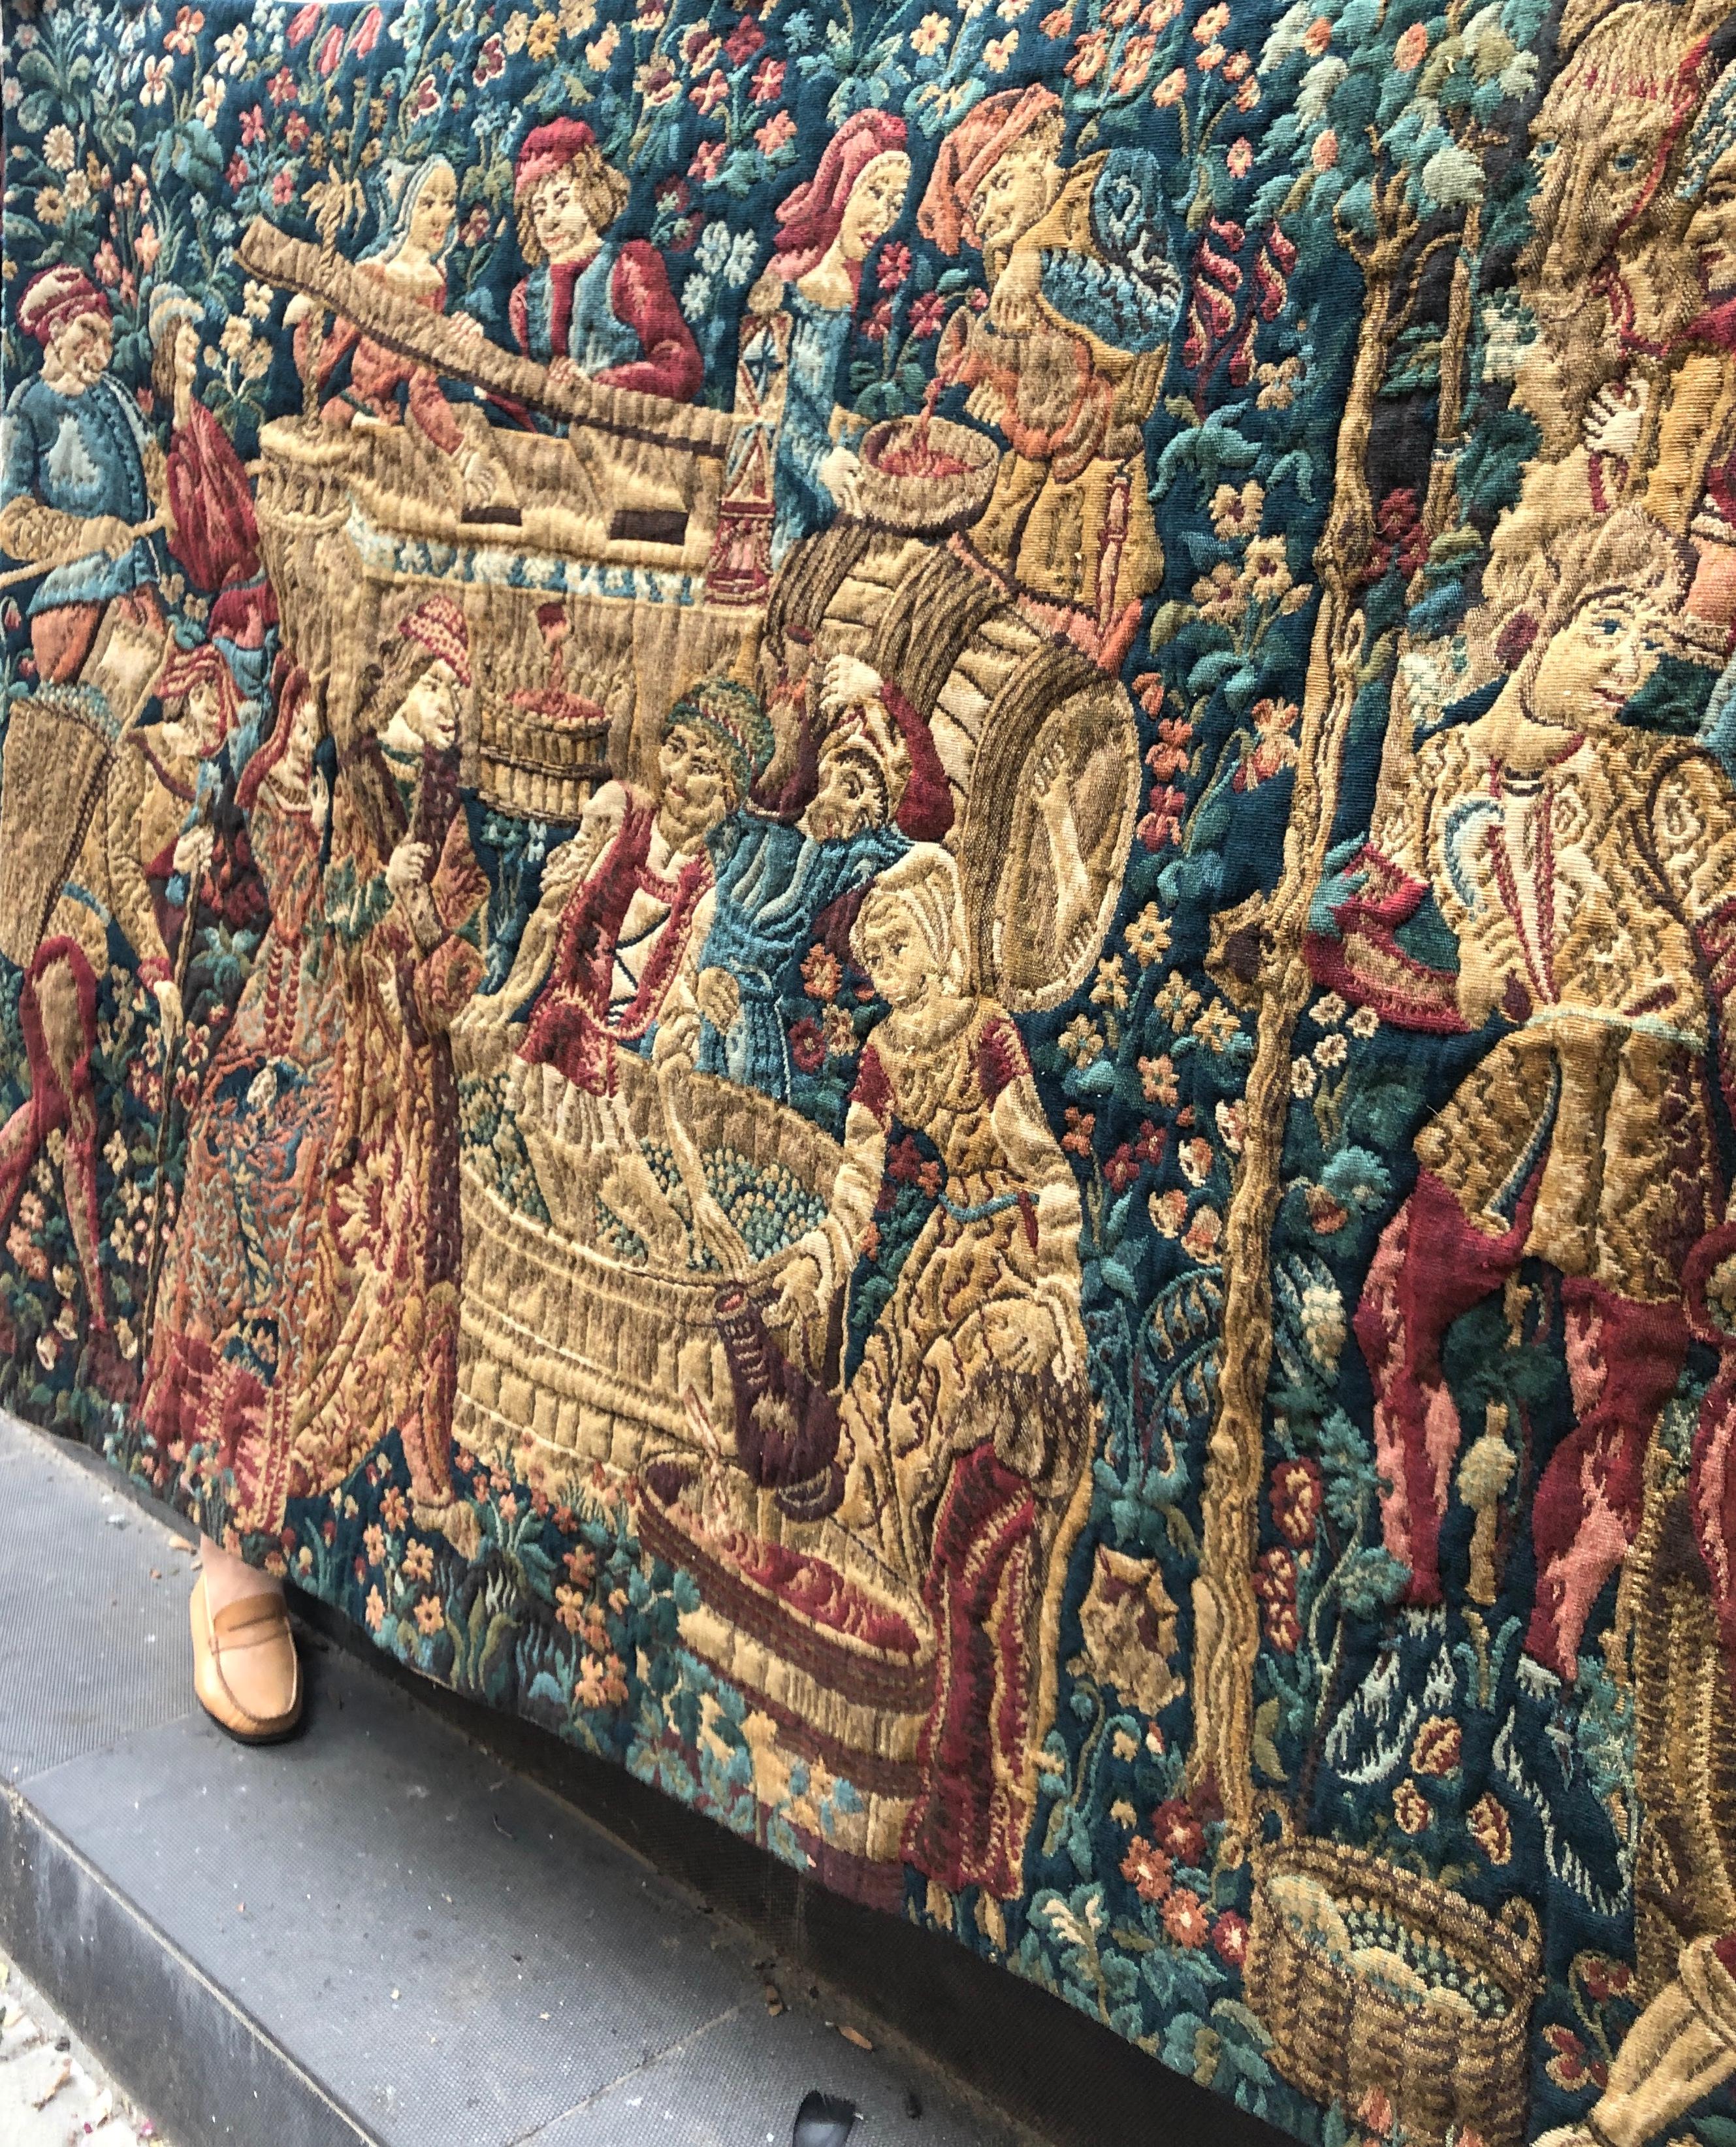 Large tapestry from the beginning of the 20th century based on a medieval scene with many characters in vivid colours.
Excellent condition, should last a lifetime.
There is an authentic certificate at the back with number 7908.
France, circa 1920.